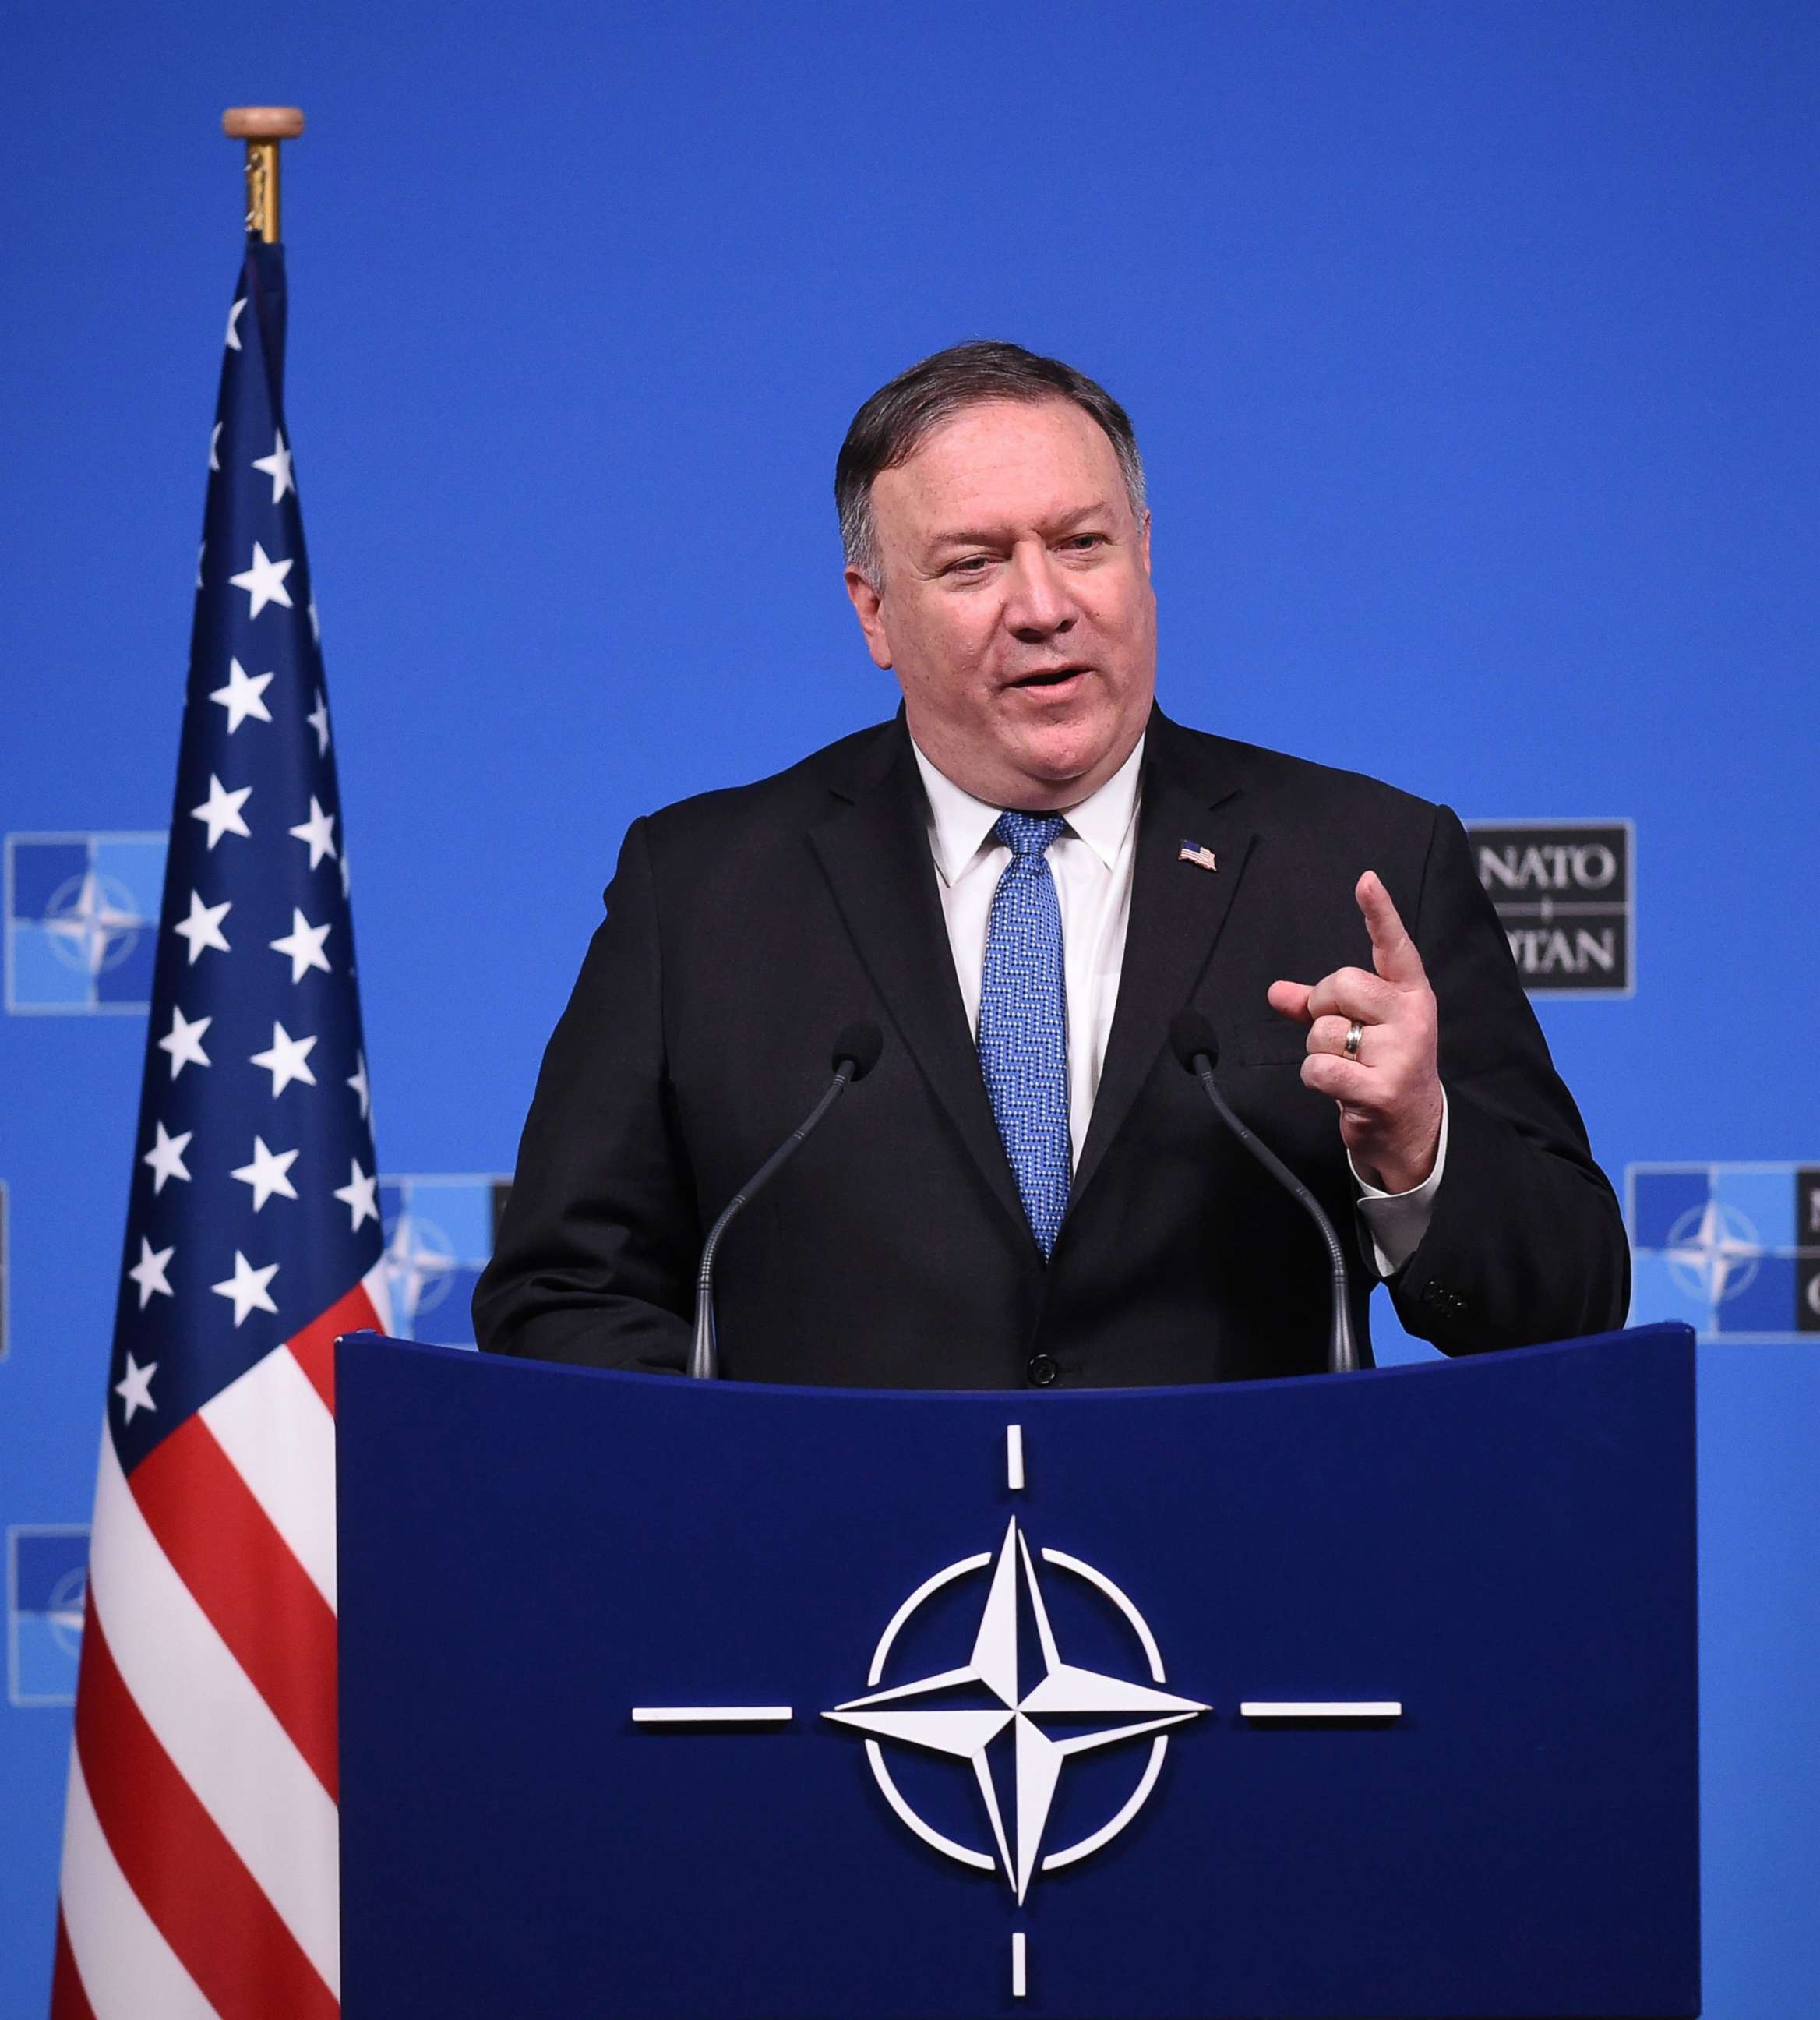 PHOTO: U.S. Secretary of State, Mike Pompeo talks during a press conference after a NATO Foreign Ministers meeting at the NATO headquarters in Brussels, Dec. 4, 2018.